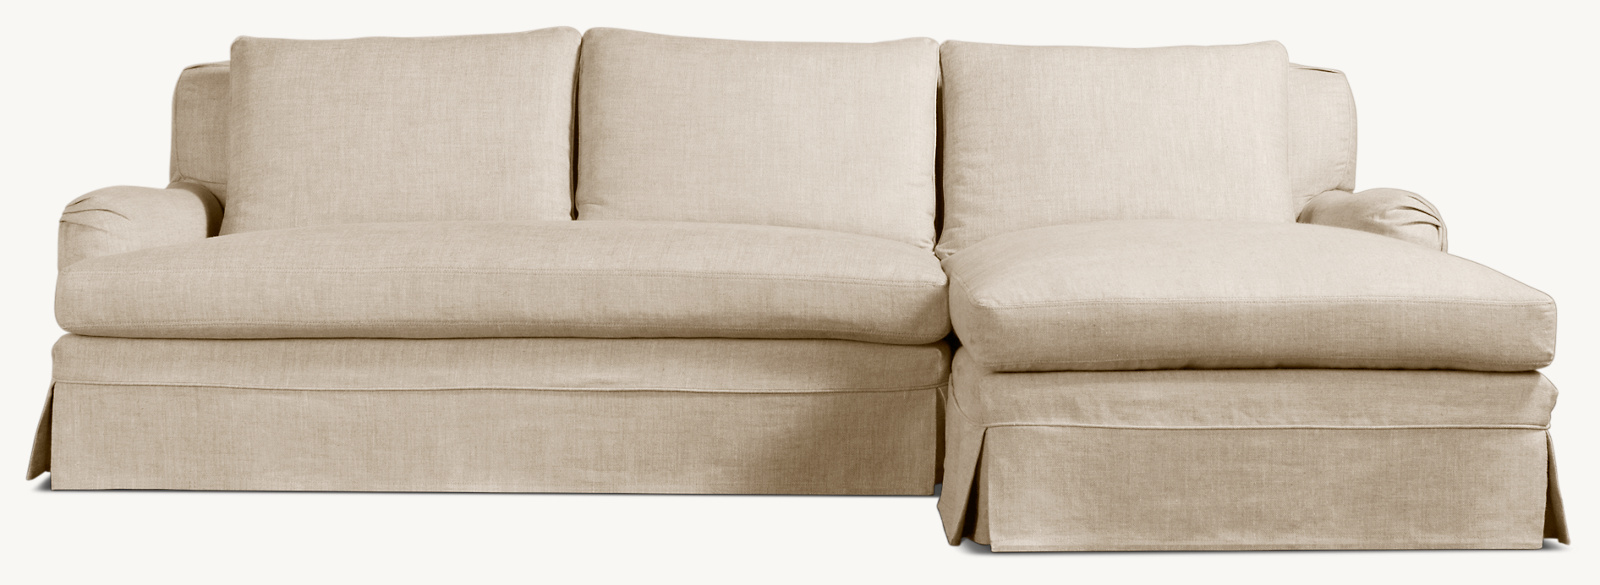 Shown in Sand Belgian Linen; sectional consists of 1 left-arm sofa and 1 right-arm chaise. Cushion configuration may vary by component.